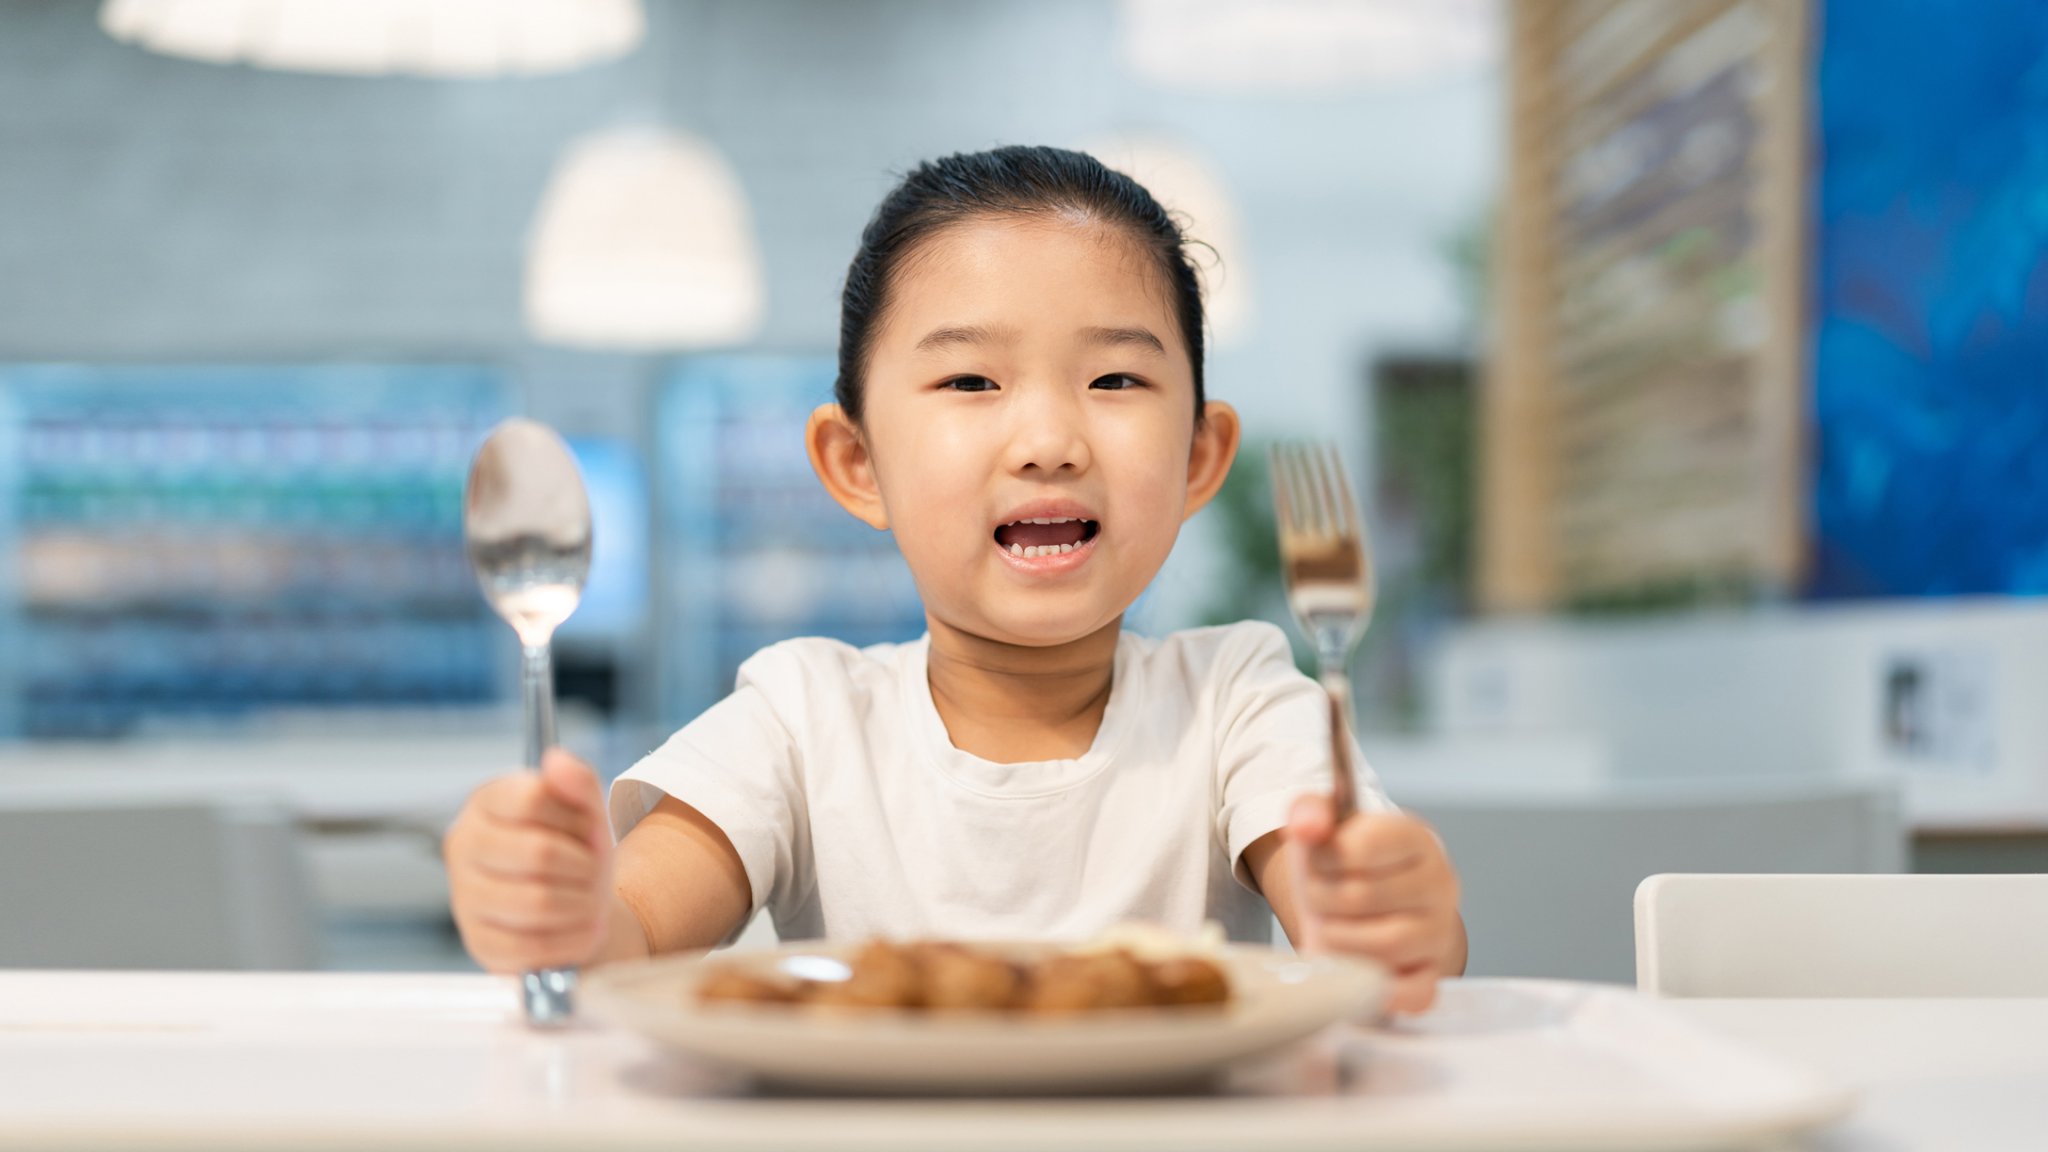 Expert advice: Is "fake meat" really safe for kids?